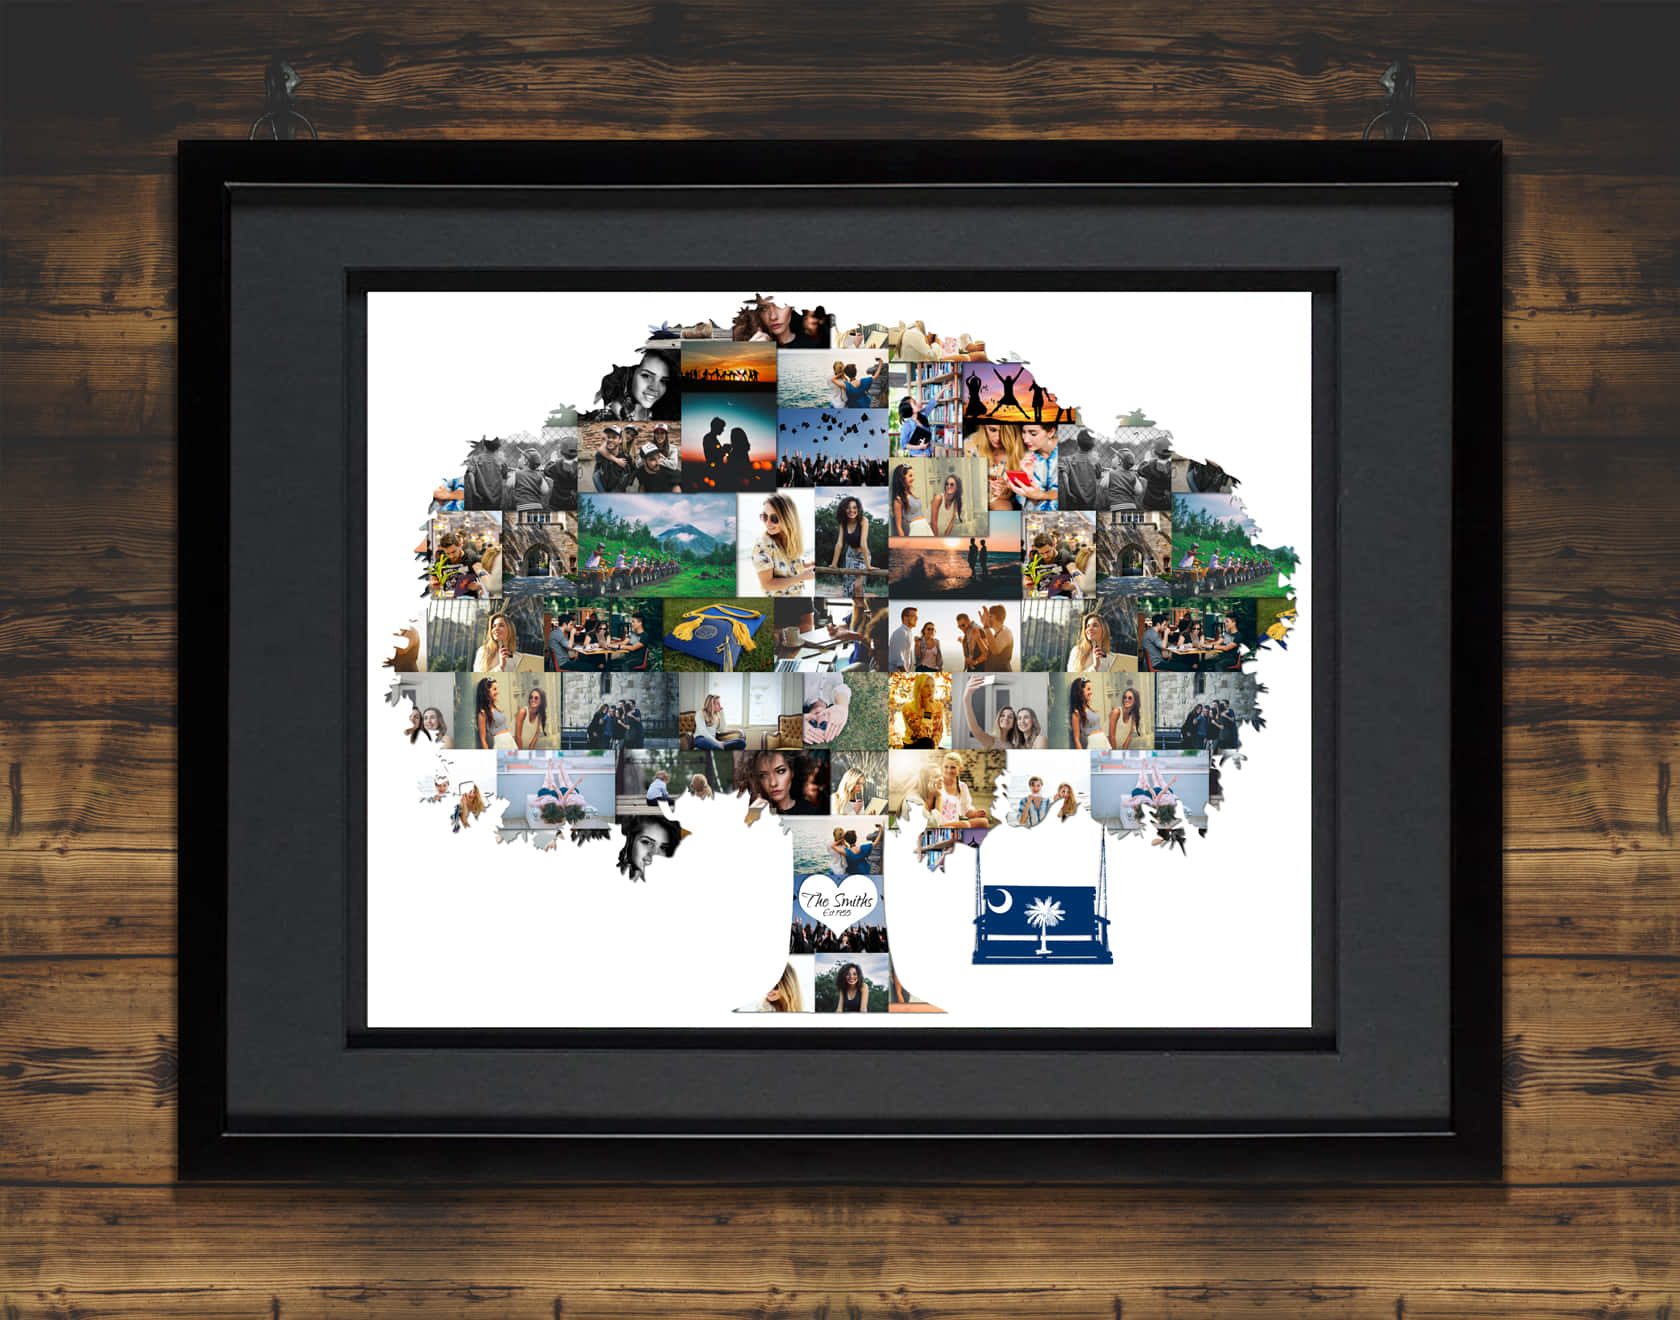 A Framed Photo Collage Of People And Pictures